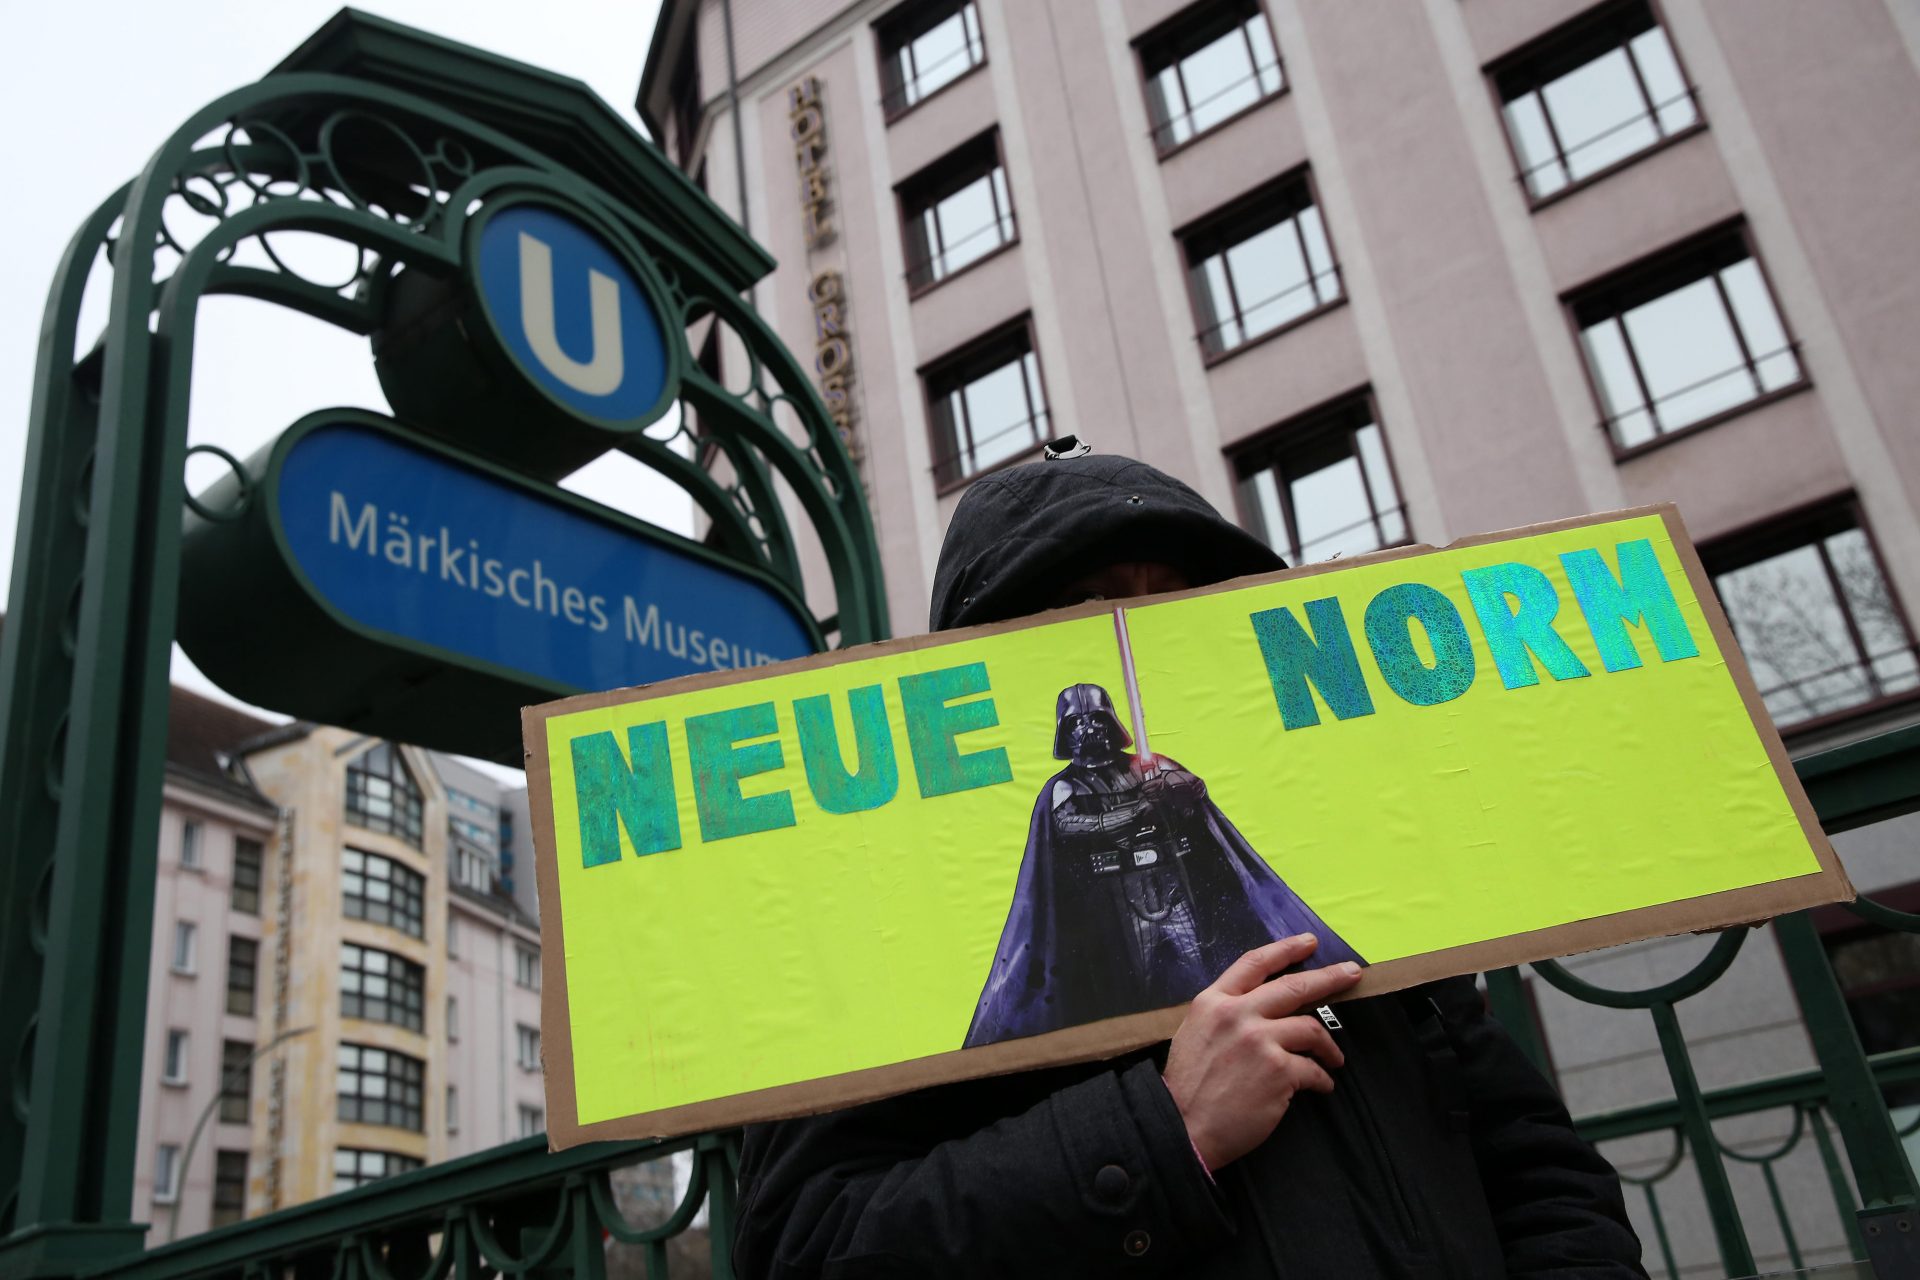 A protest against mandatory coronavirus vaccinations in Berlin. Photo: Photo by Adam Berry/Getty Images.